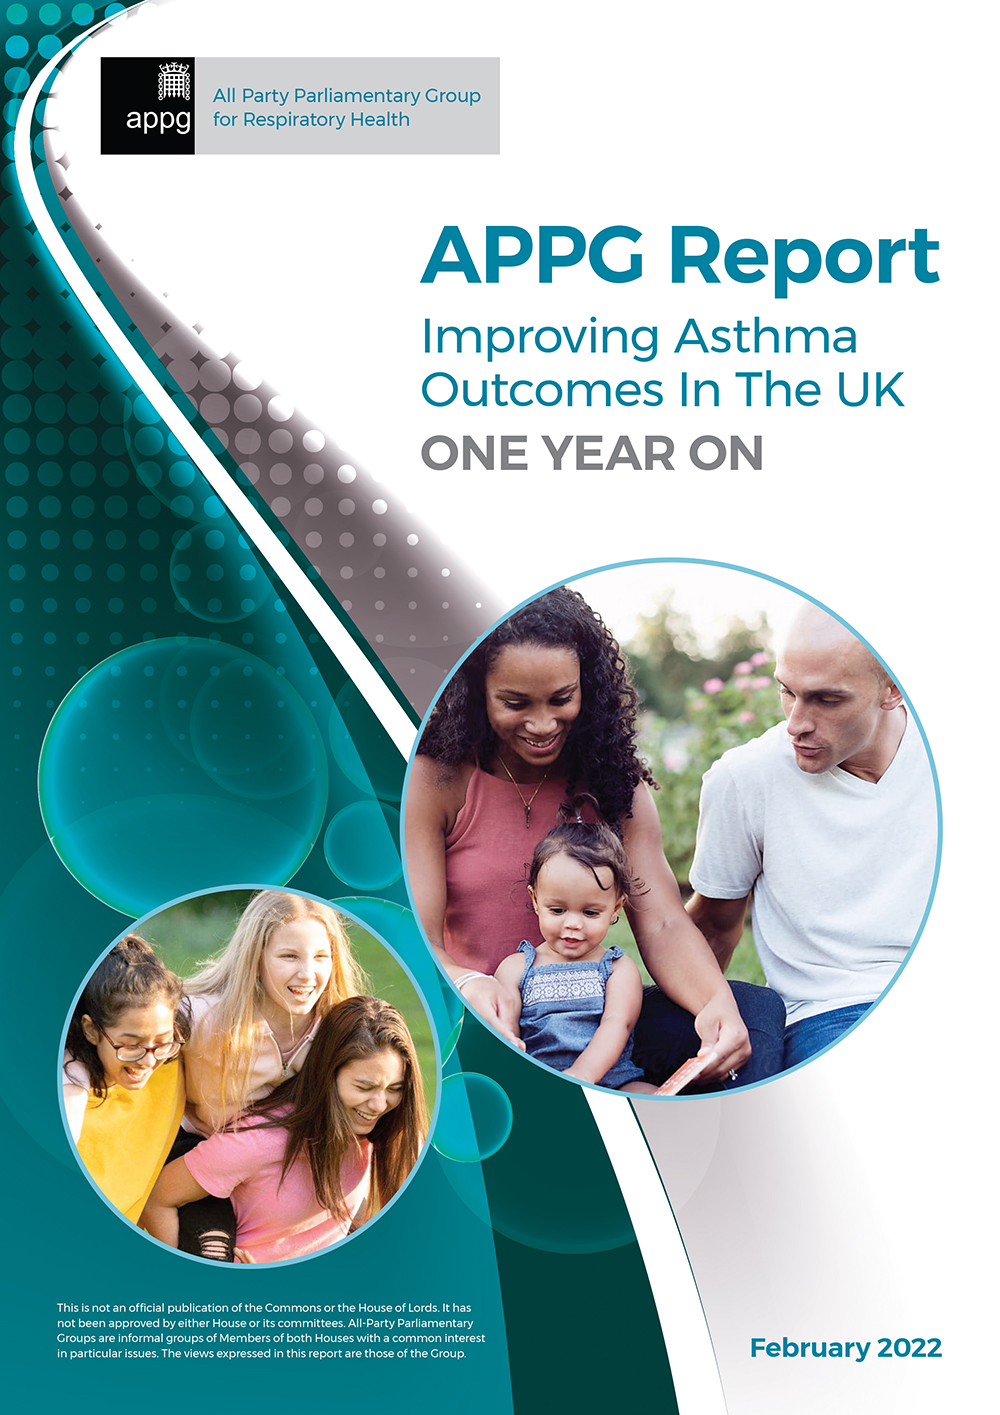 APPG Report Improving Asthma Outcomes In The UK